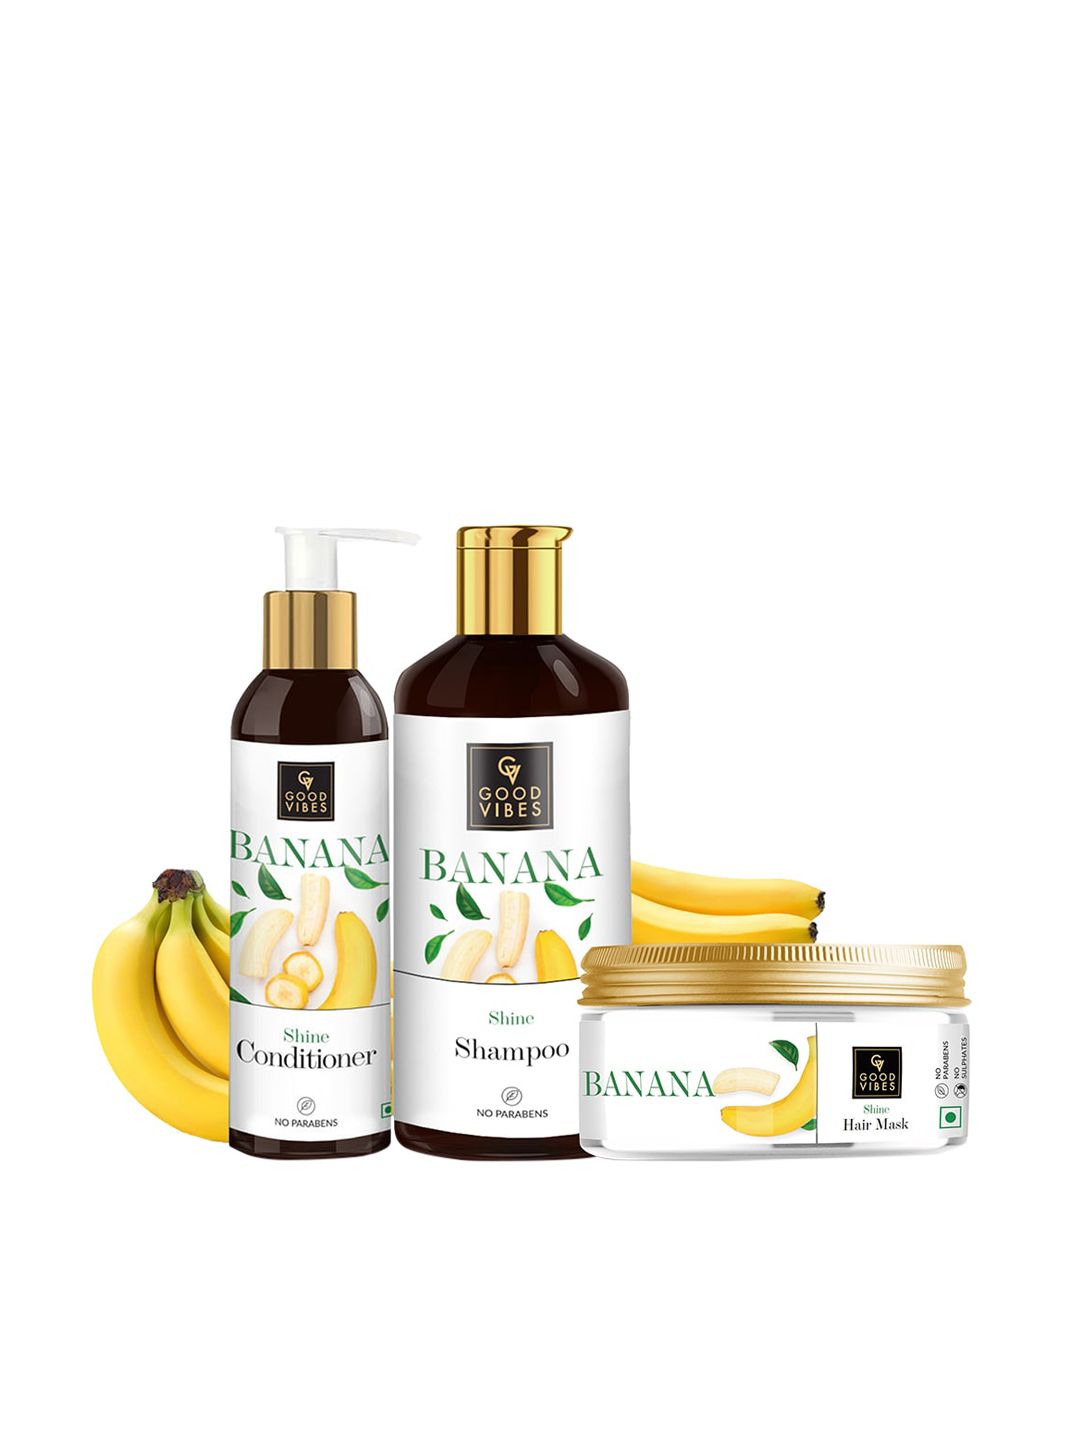 Good Vibes Banana Haircare Combo - Shampoo 300ml , Conditioner 200ml, Hair Mask 200g Price in India